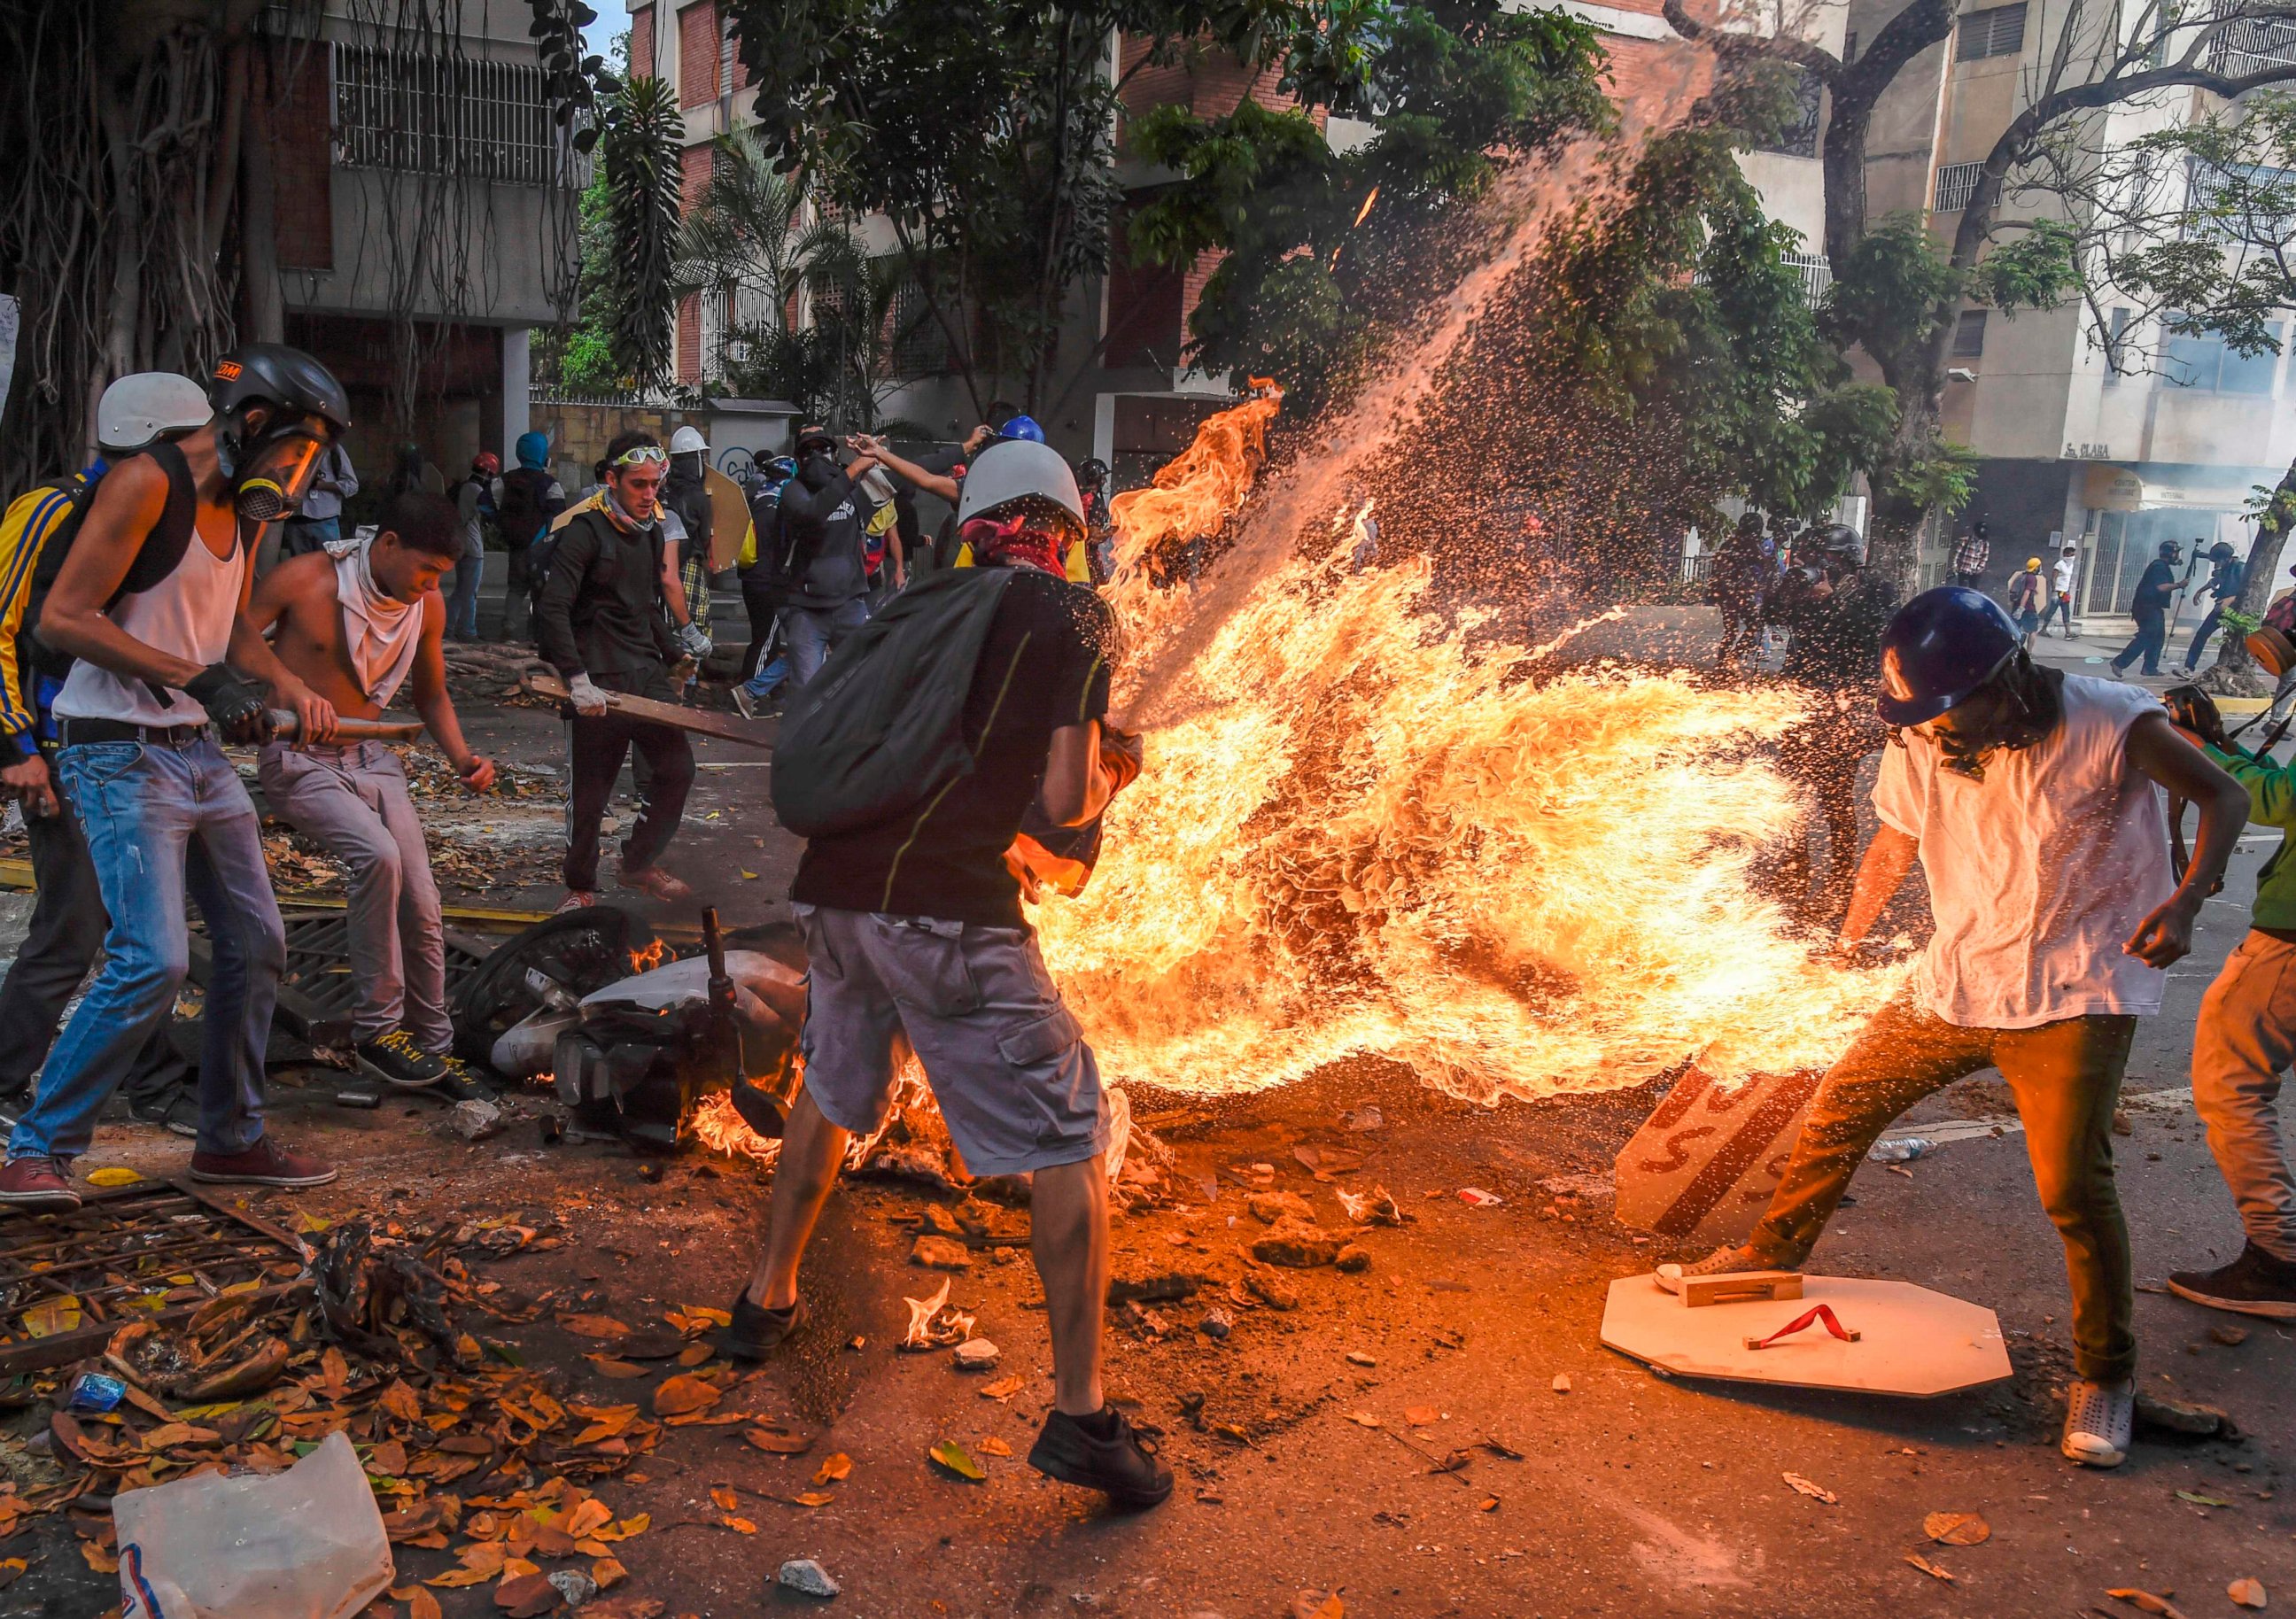 PHOTO: The gas tank of a police motorcycle explodes during clashes in a protest against Venezuelan President Nicolas Maduro, in Caracas on May 3, 2017.
